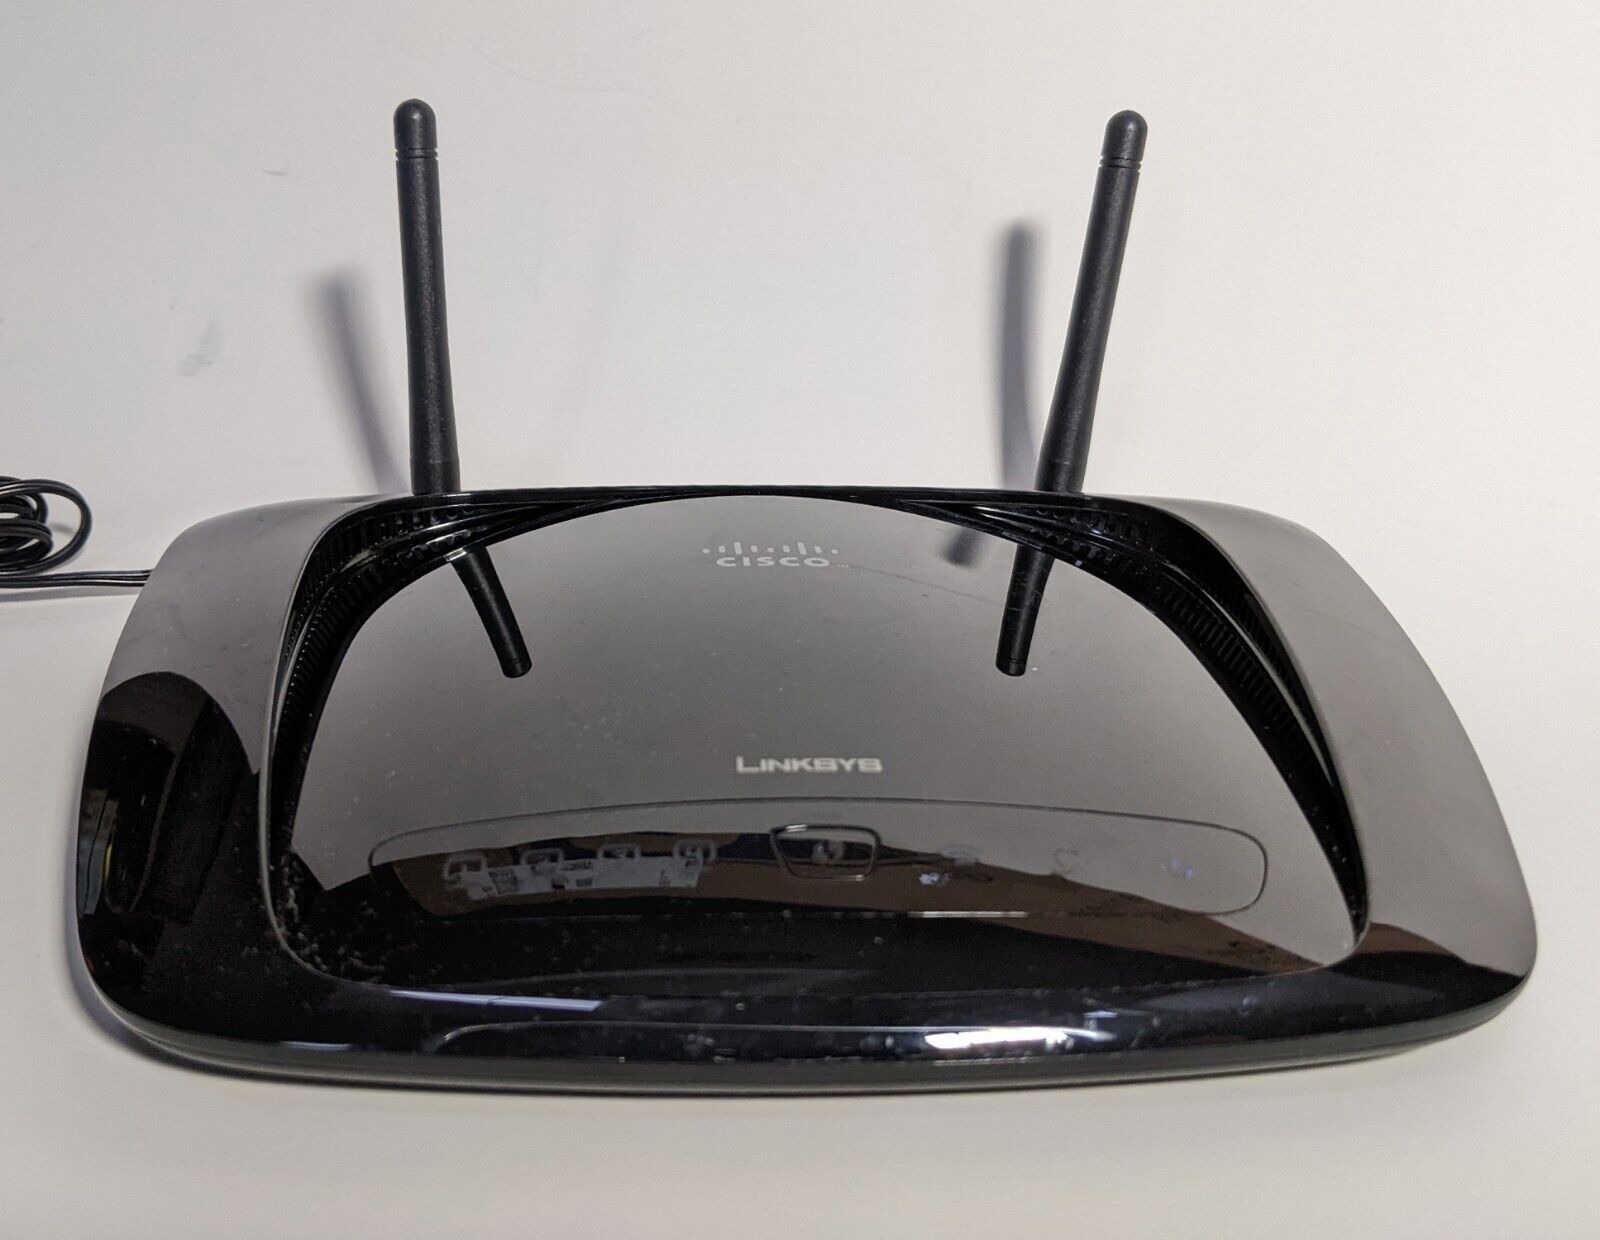 Linksys Wireless-N Broadband Router WRT160NL by CISCO - 4-Port 10/100Mbps